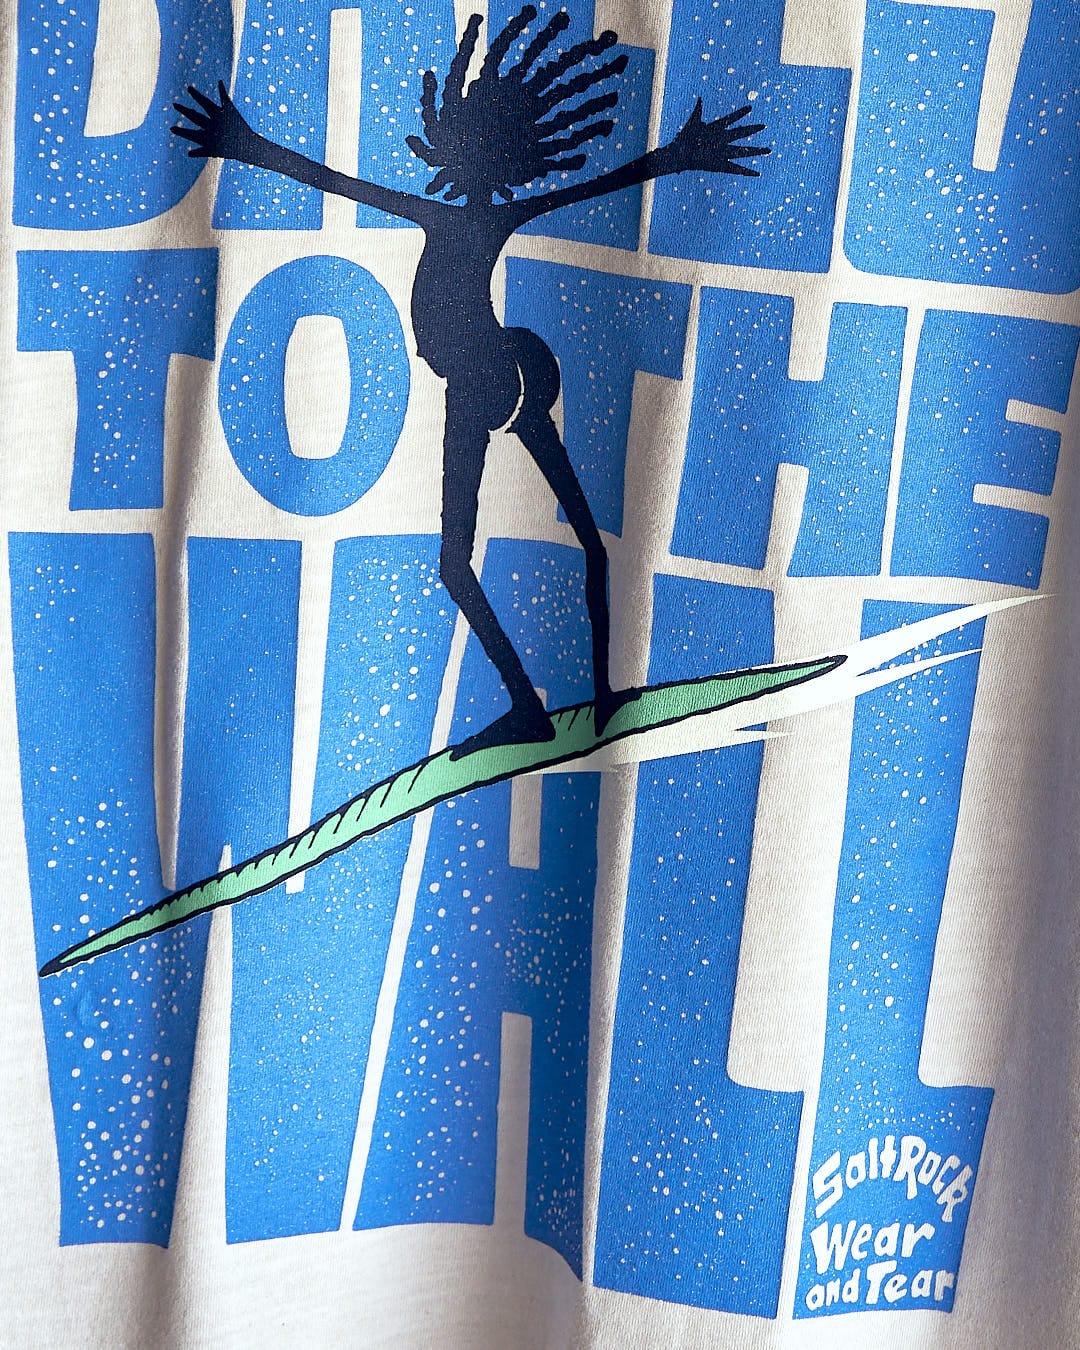 A Saltrock "Balls To The Wall - Limited Edition 35 Years" t-shirt with a surfer on a surfboard.